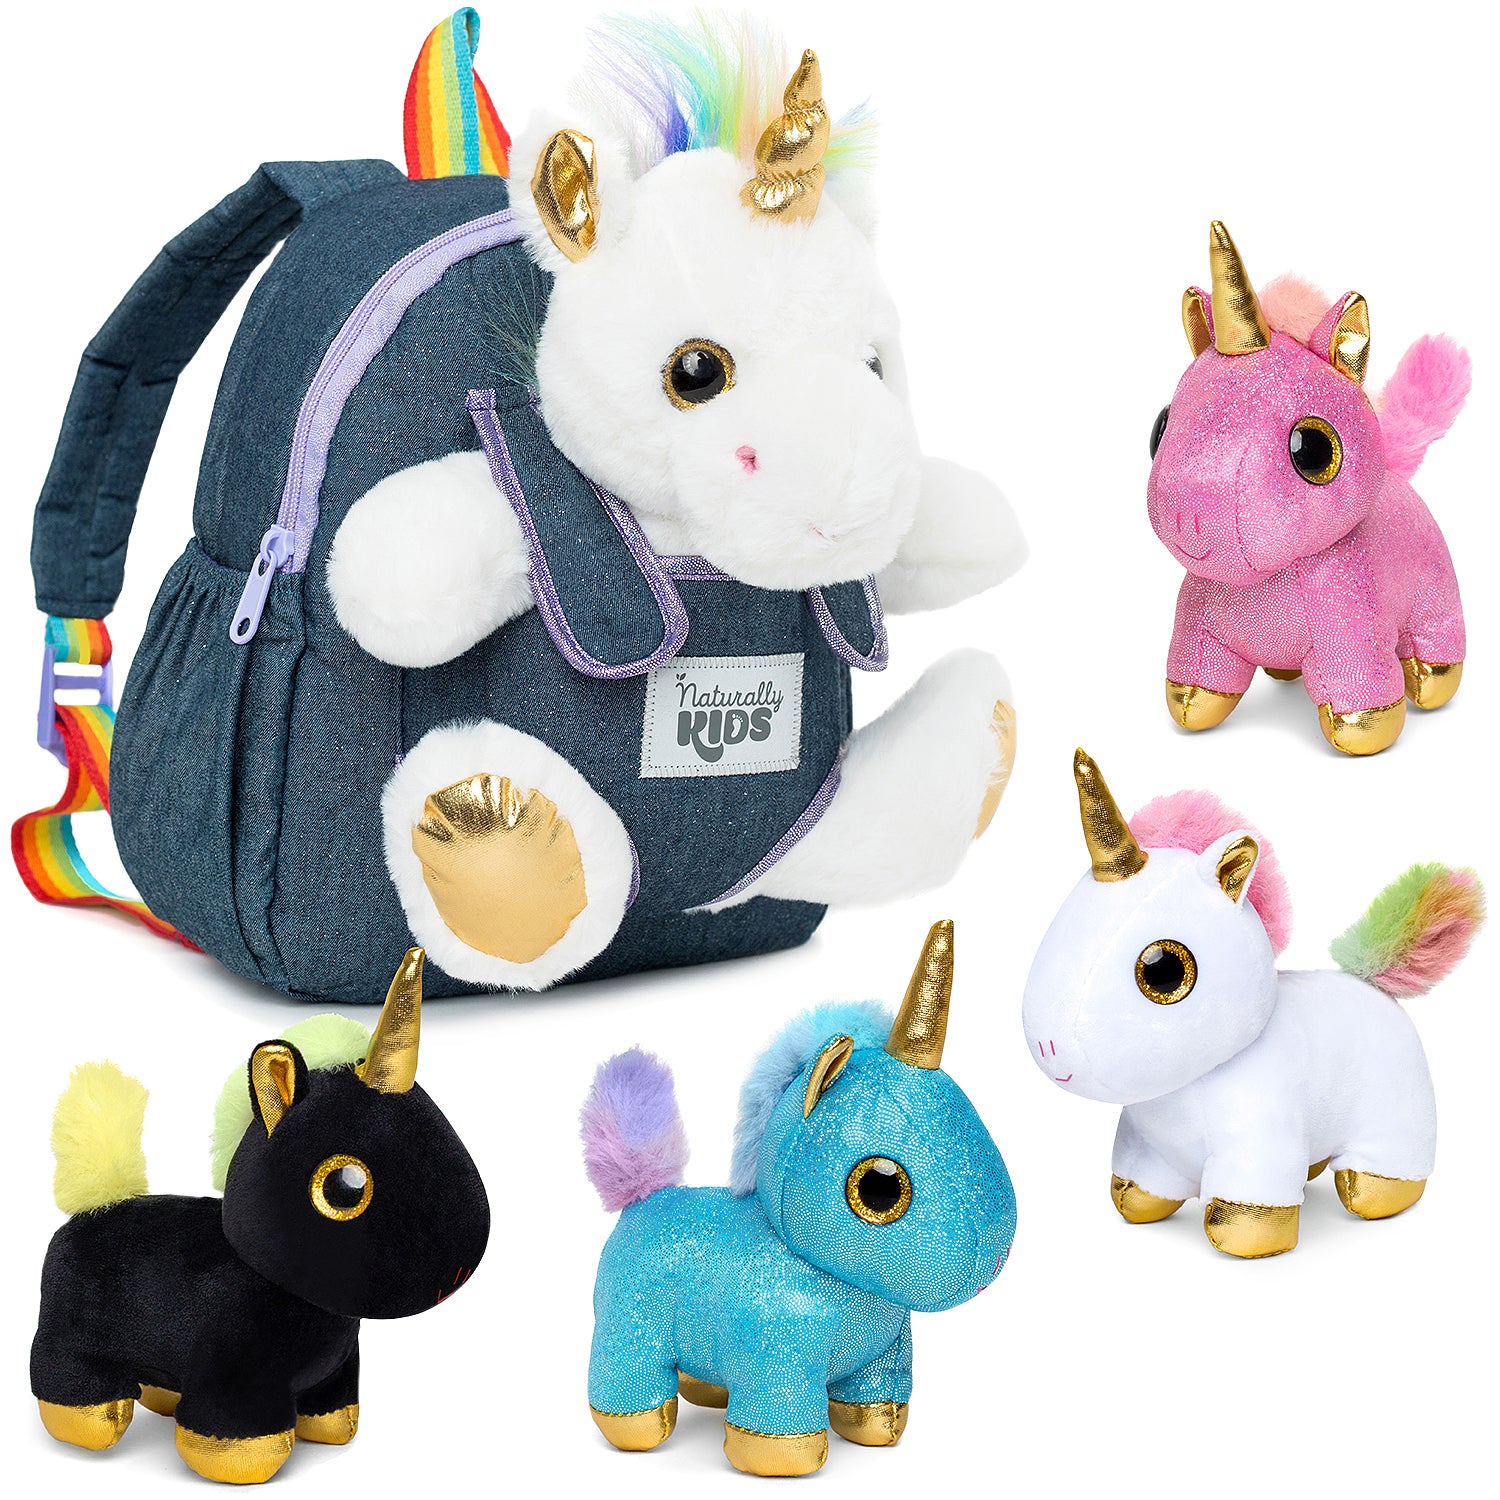 Pixie Crush Unicorn Toys Stuffed Animal Gift Plush Set with Rainbow Case –  5 Piece Stuffed Animals with 2 Unicorns, Kitty, Puppy, and Narwhal –  Toddler Gifts for Girls Aged 3, 4, 5 ,6 ,7, 8 yr olds - Walmart.com